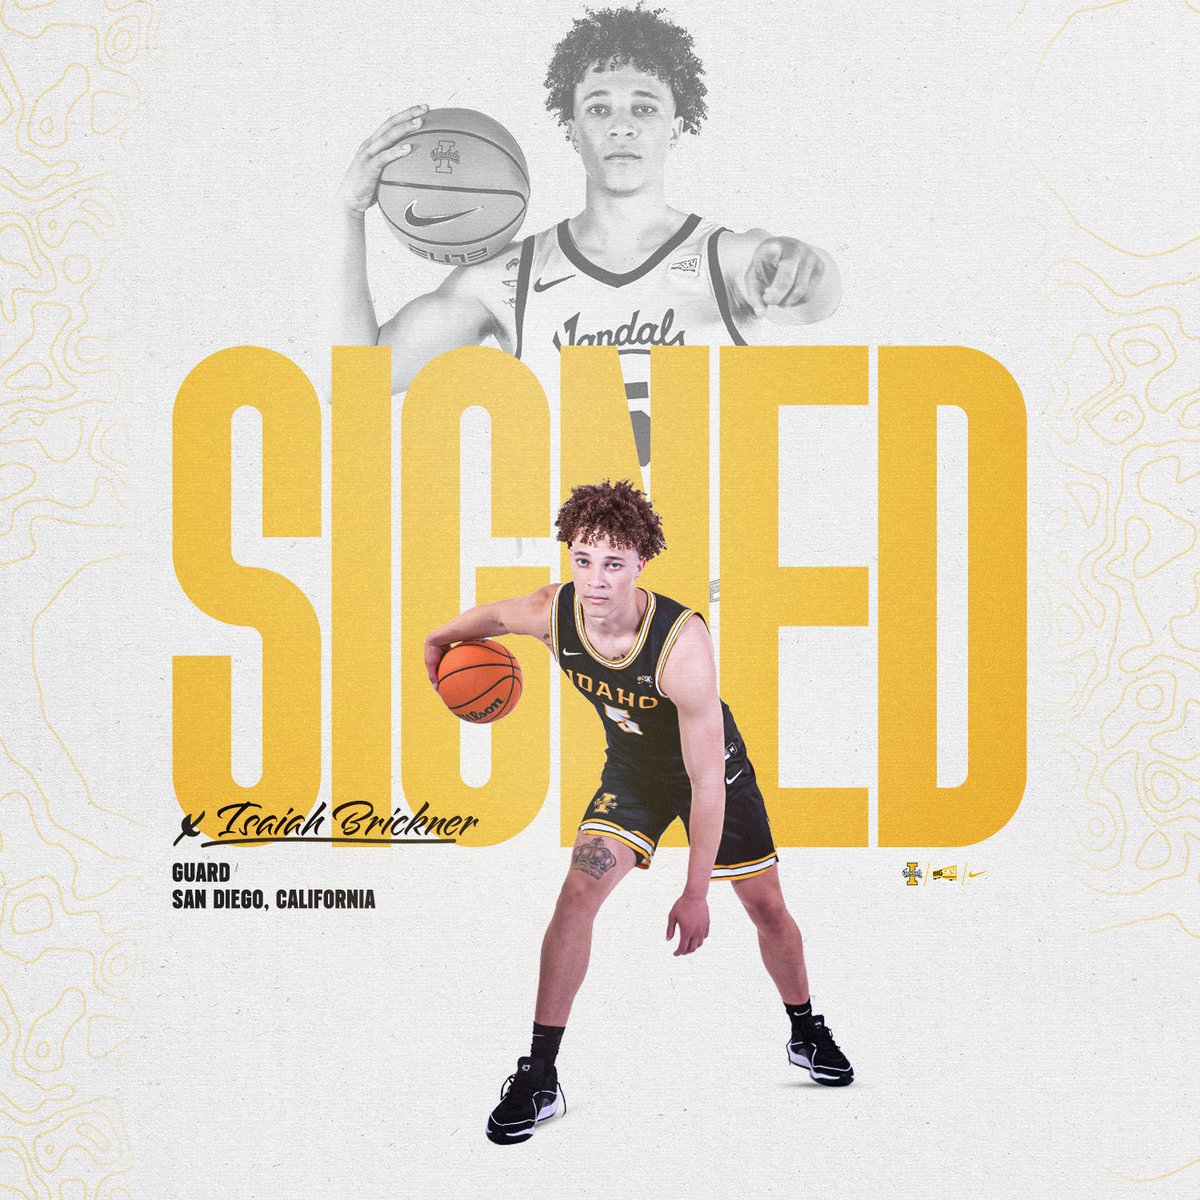 SIGNED » 𝕀𝕤𝕒𝕚𝕒𝕙 𝔹𝕣𝕚𝕔𝕜𝕟𝕖𝕣 Welcome the California native and Marist College transfer to the Vandal family! 📝 » govandals.com/news/2024/4/23… #GoVandals